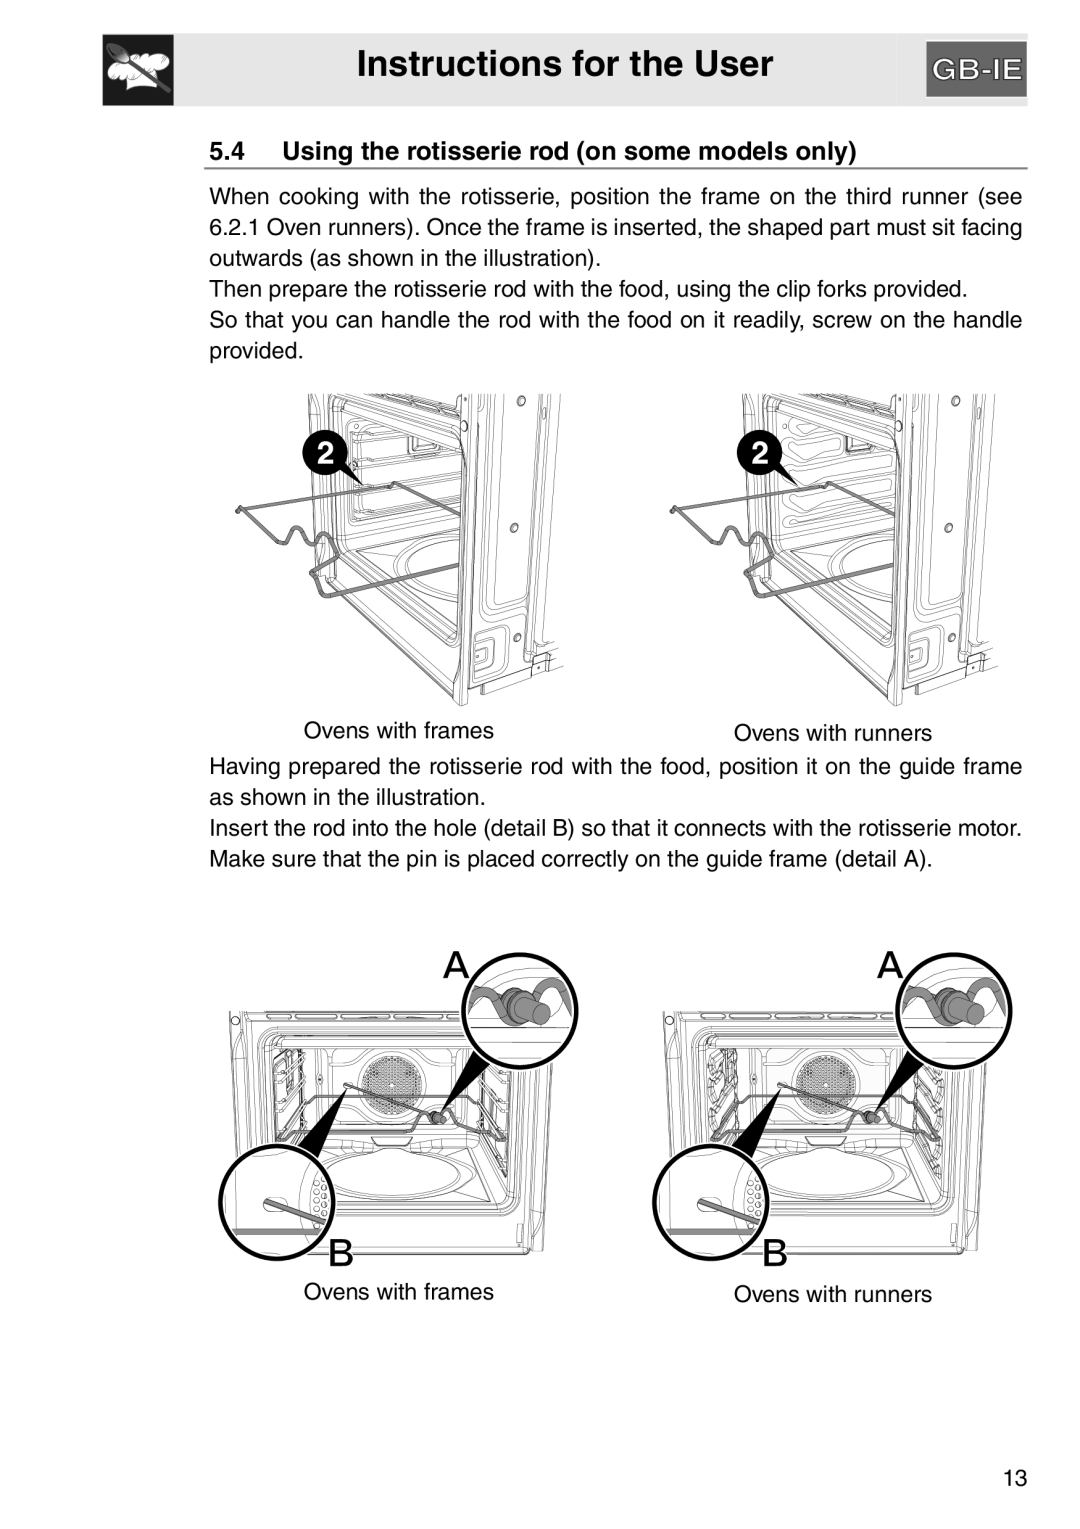 Smeg SA561X-9 installation instructions Using the rotisserie rod on some models only, Instructions for the User 